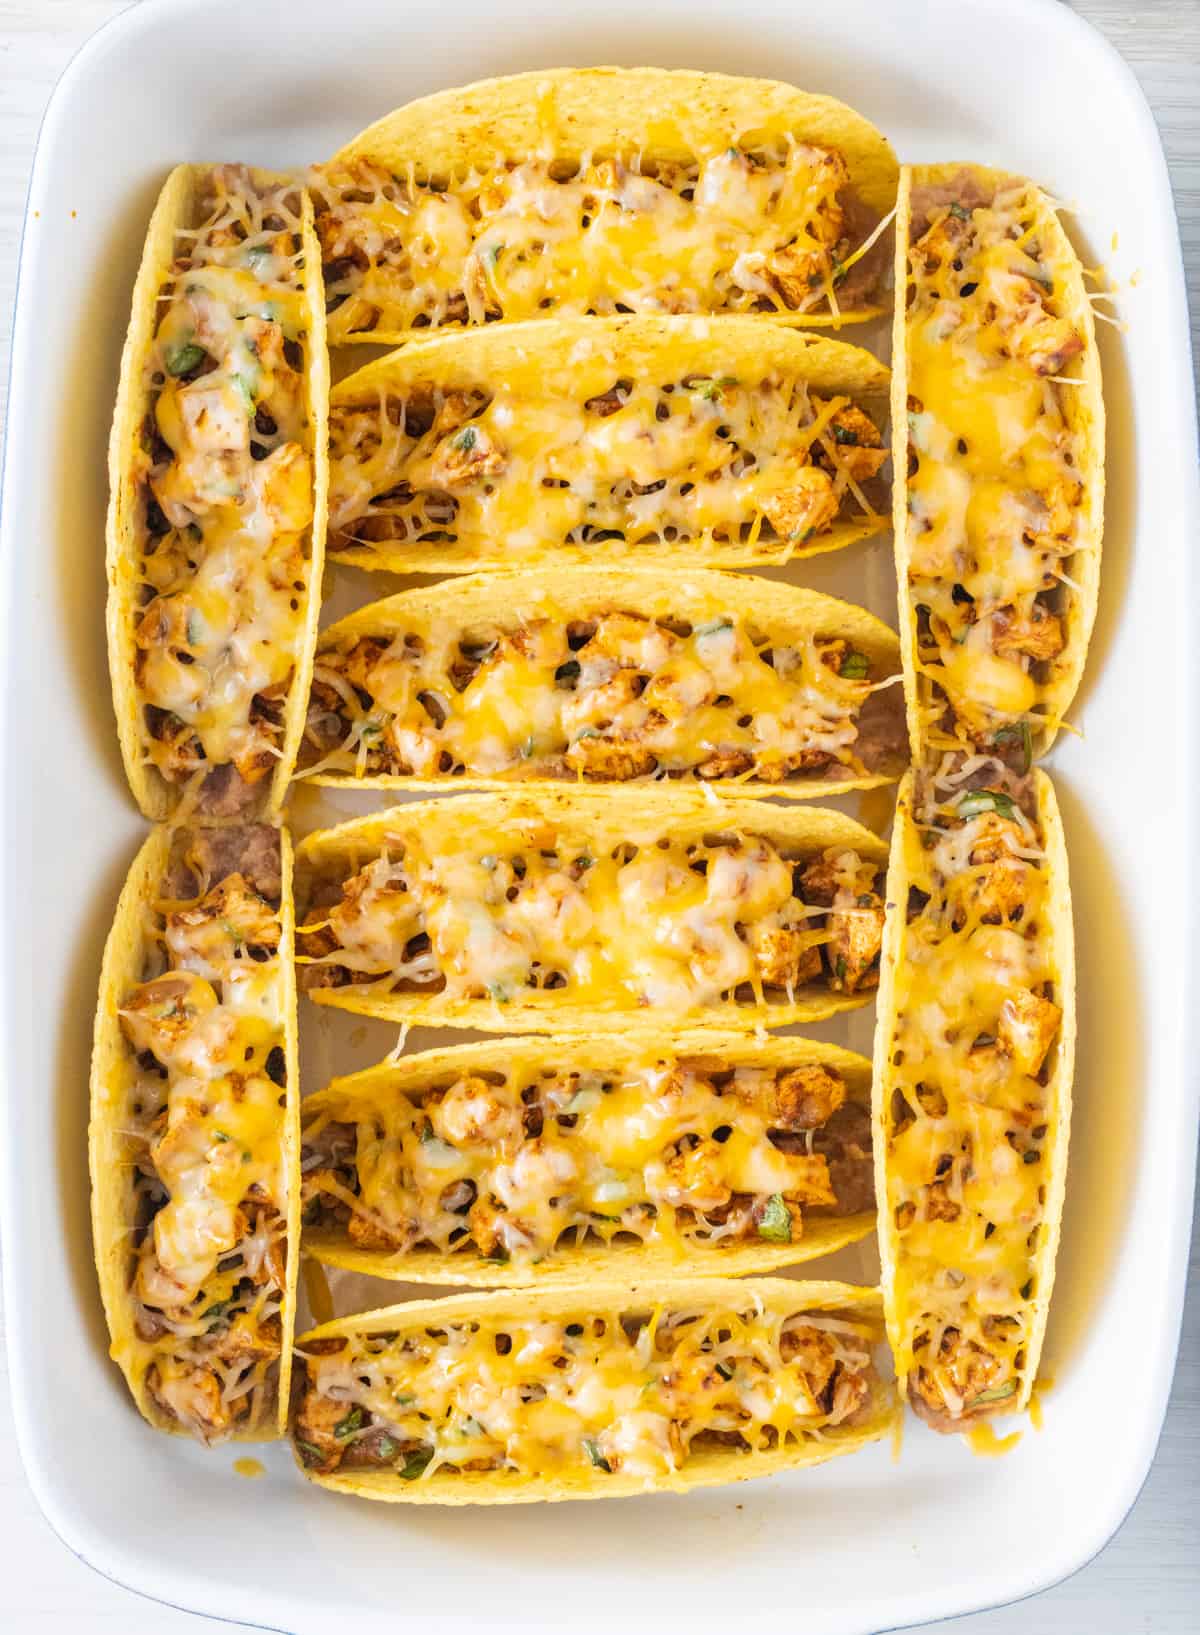 Baked chicken tacos in the baking dish.